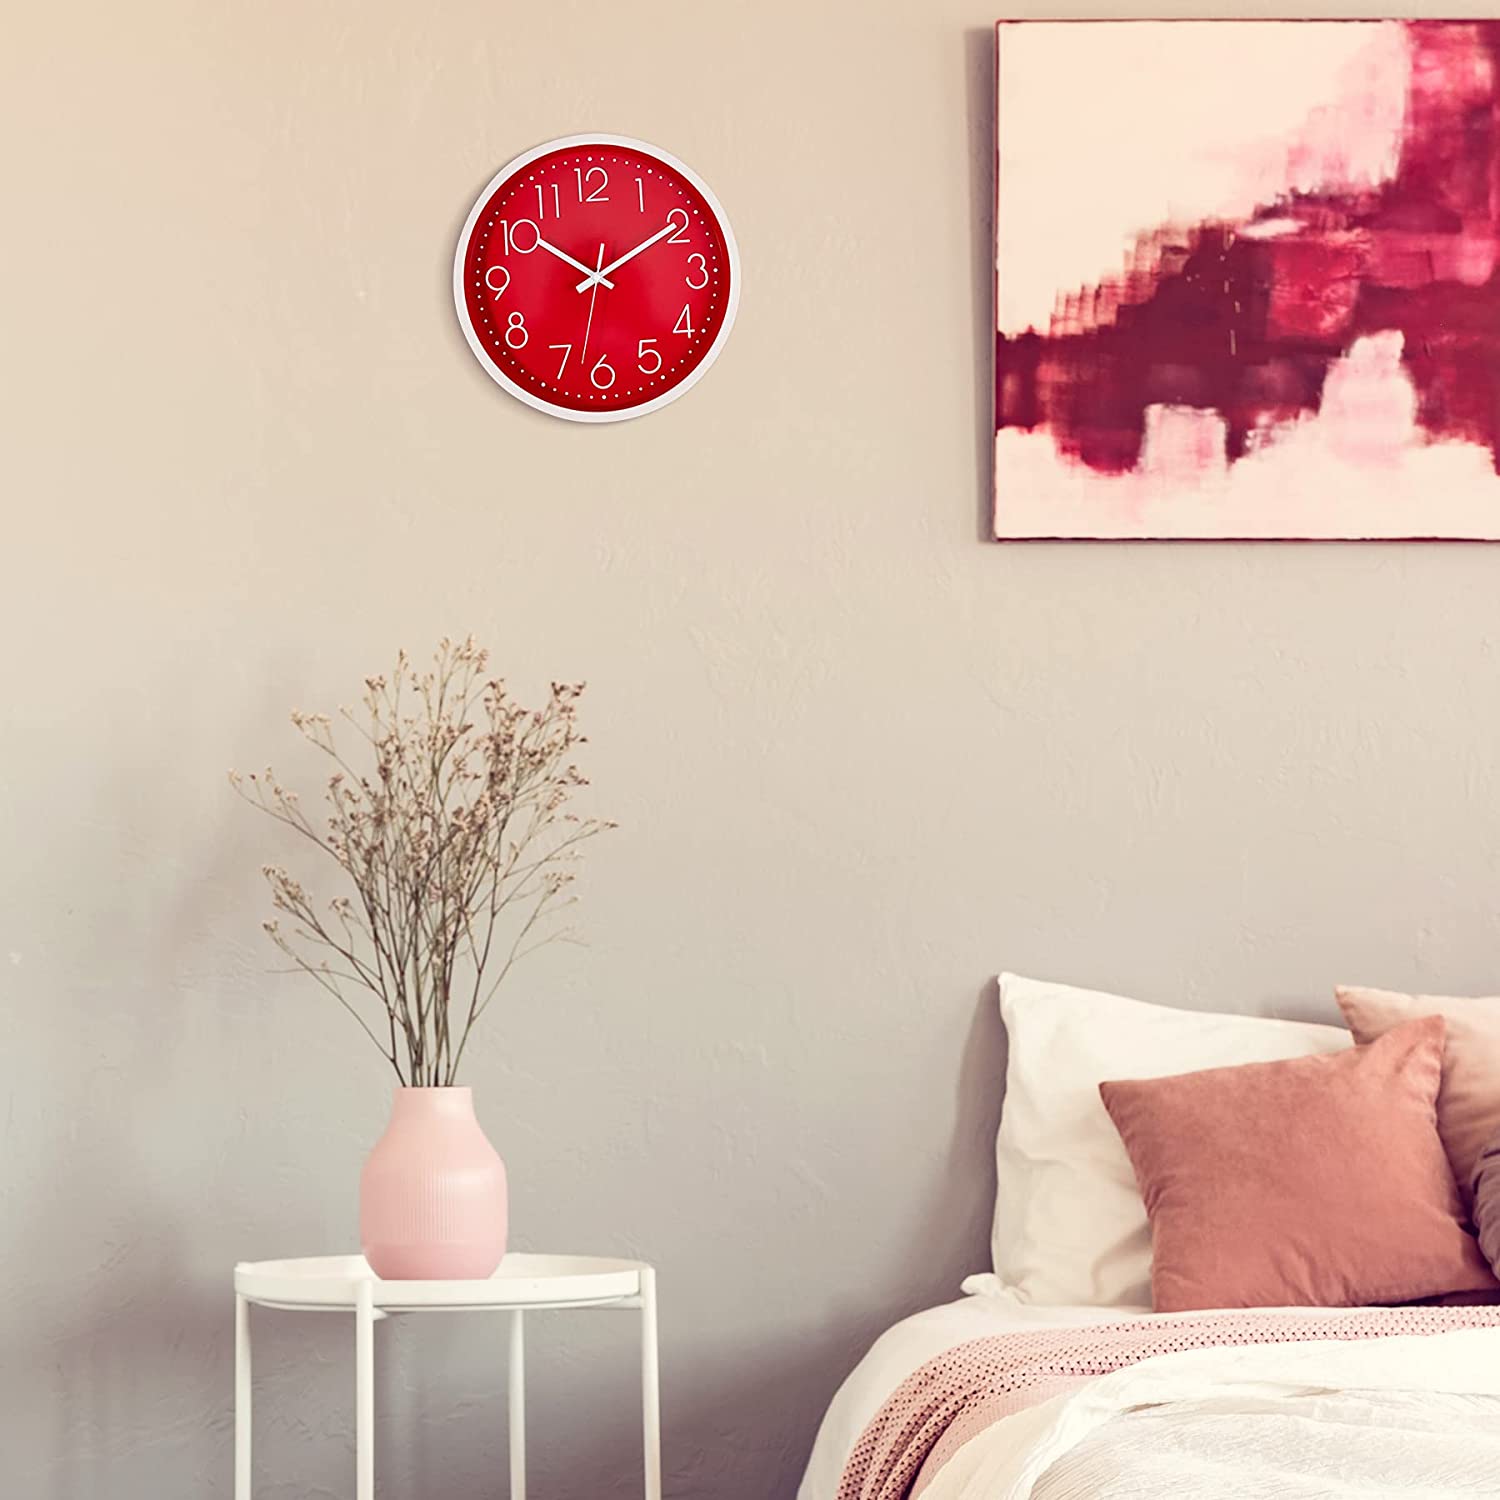 Details about   Foxtop Silent Non-Ticking Small Wall Clock Quartz Decorative Battery Operated Te 